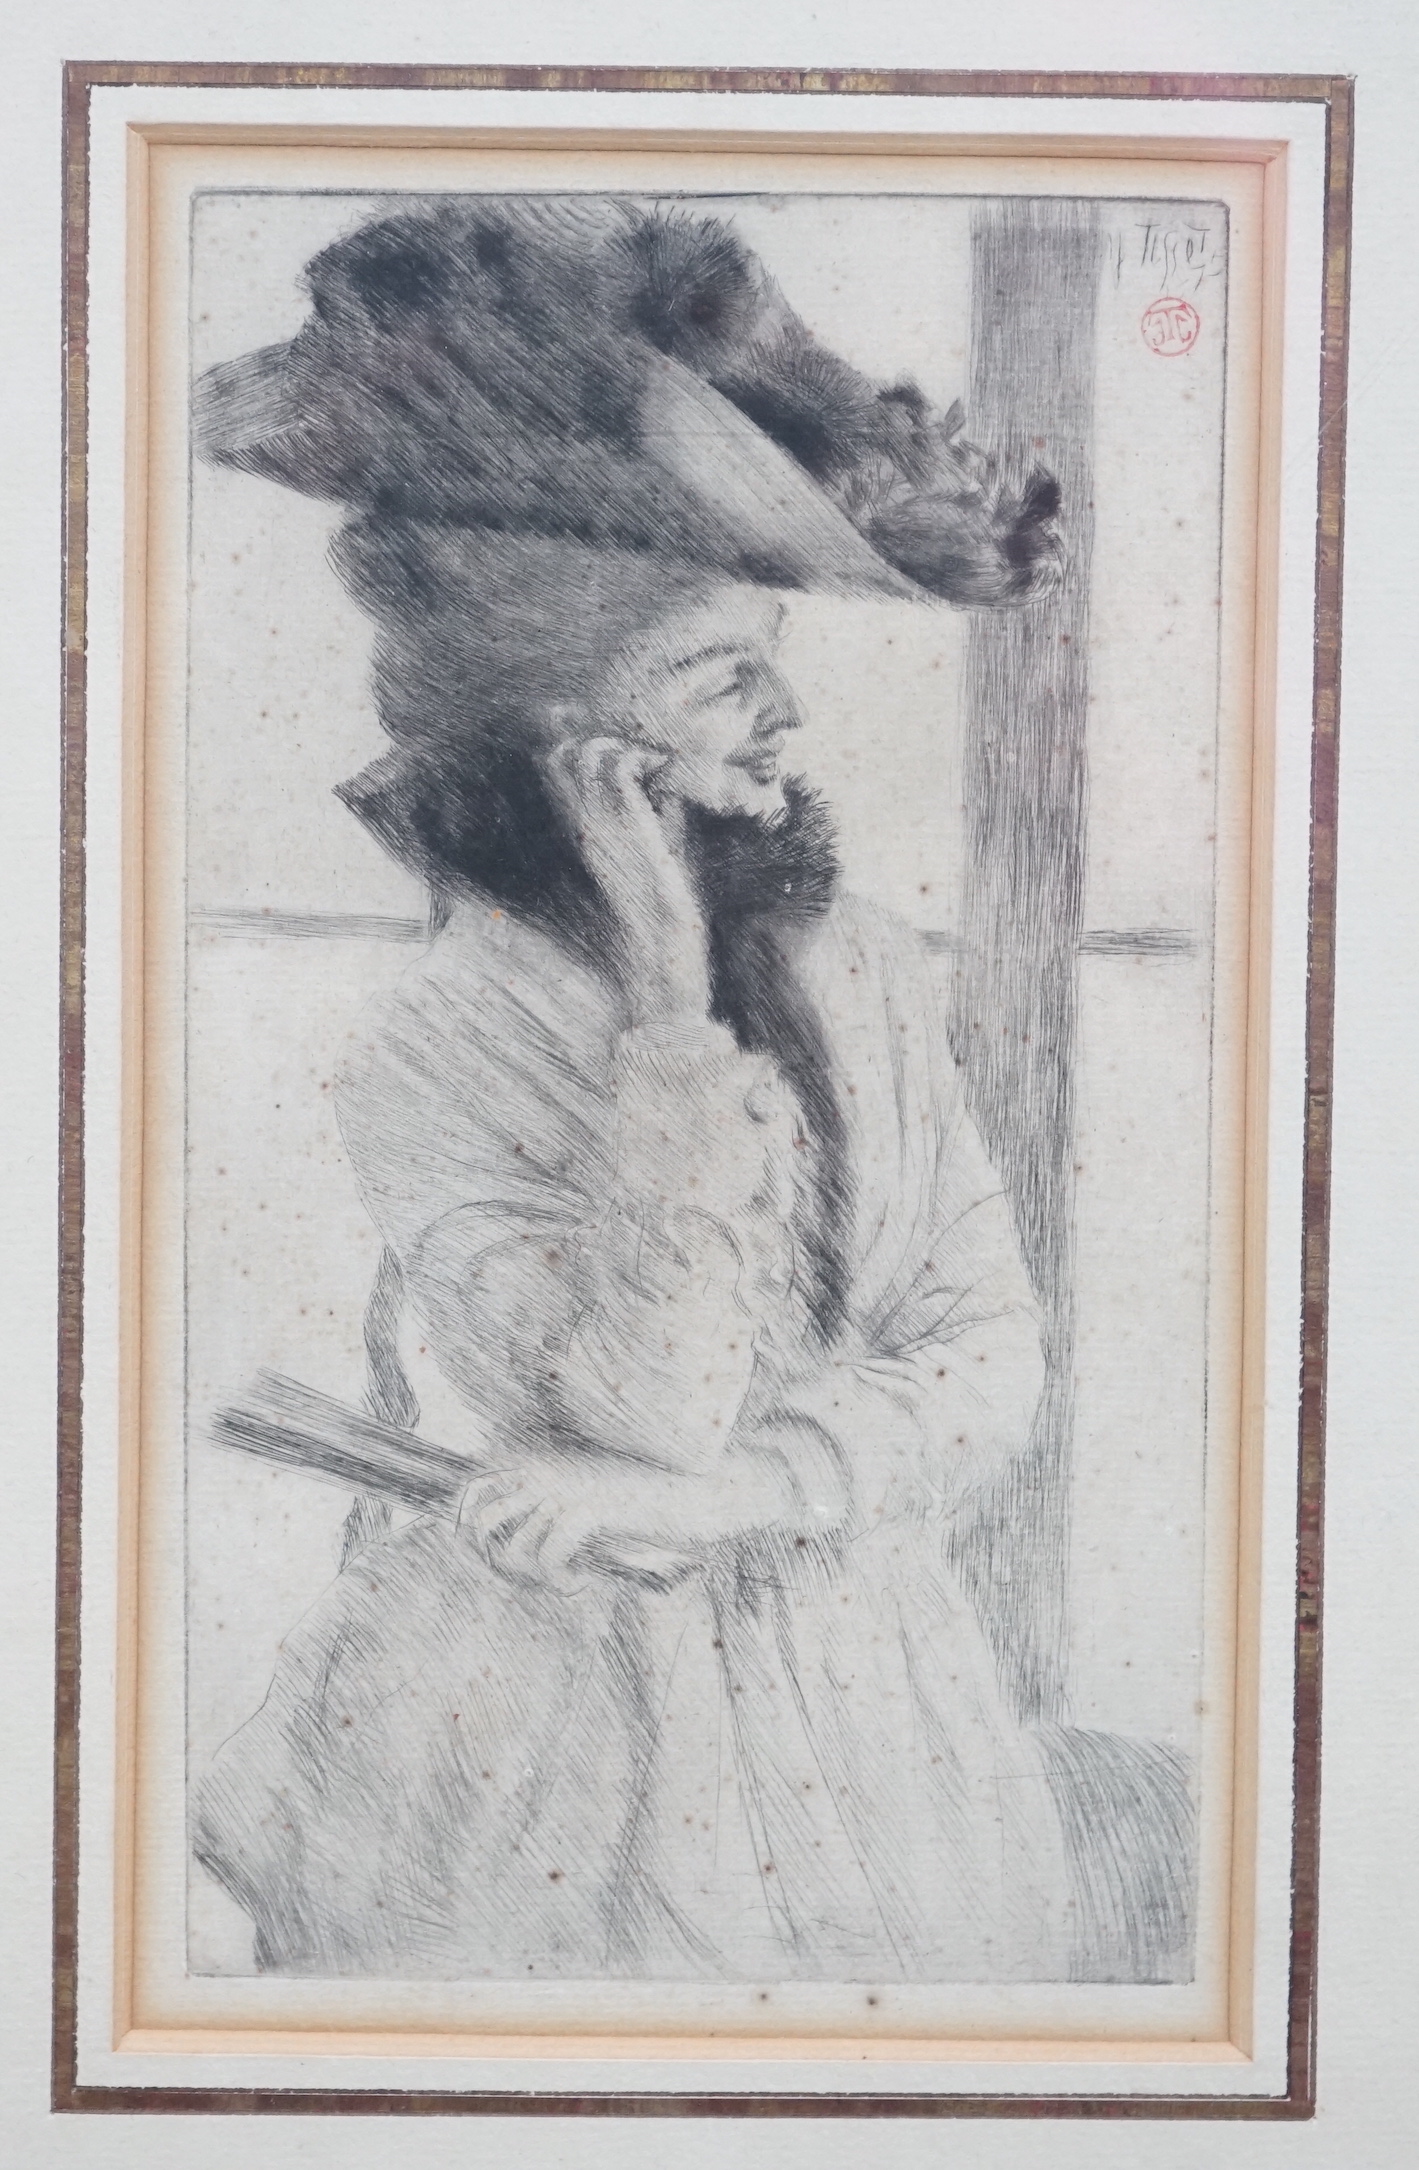 James Jacques Tissot (French, 1836-1902), 'A la fenêtre [At the Window]', [Wentworth 9], drypoint etching on laid paper, 1877, 19 x 10.75cm